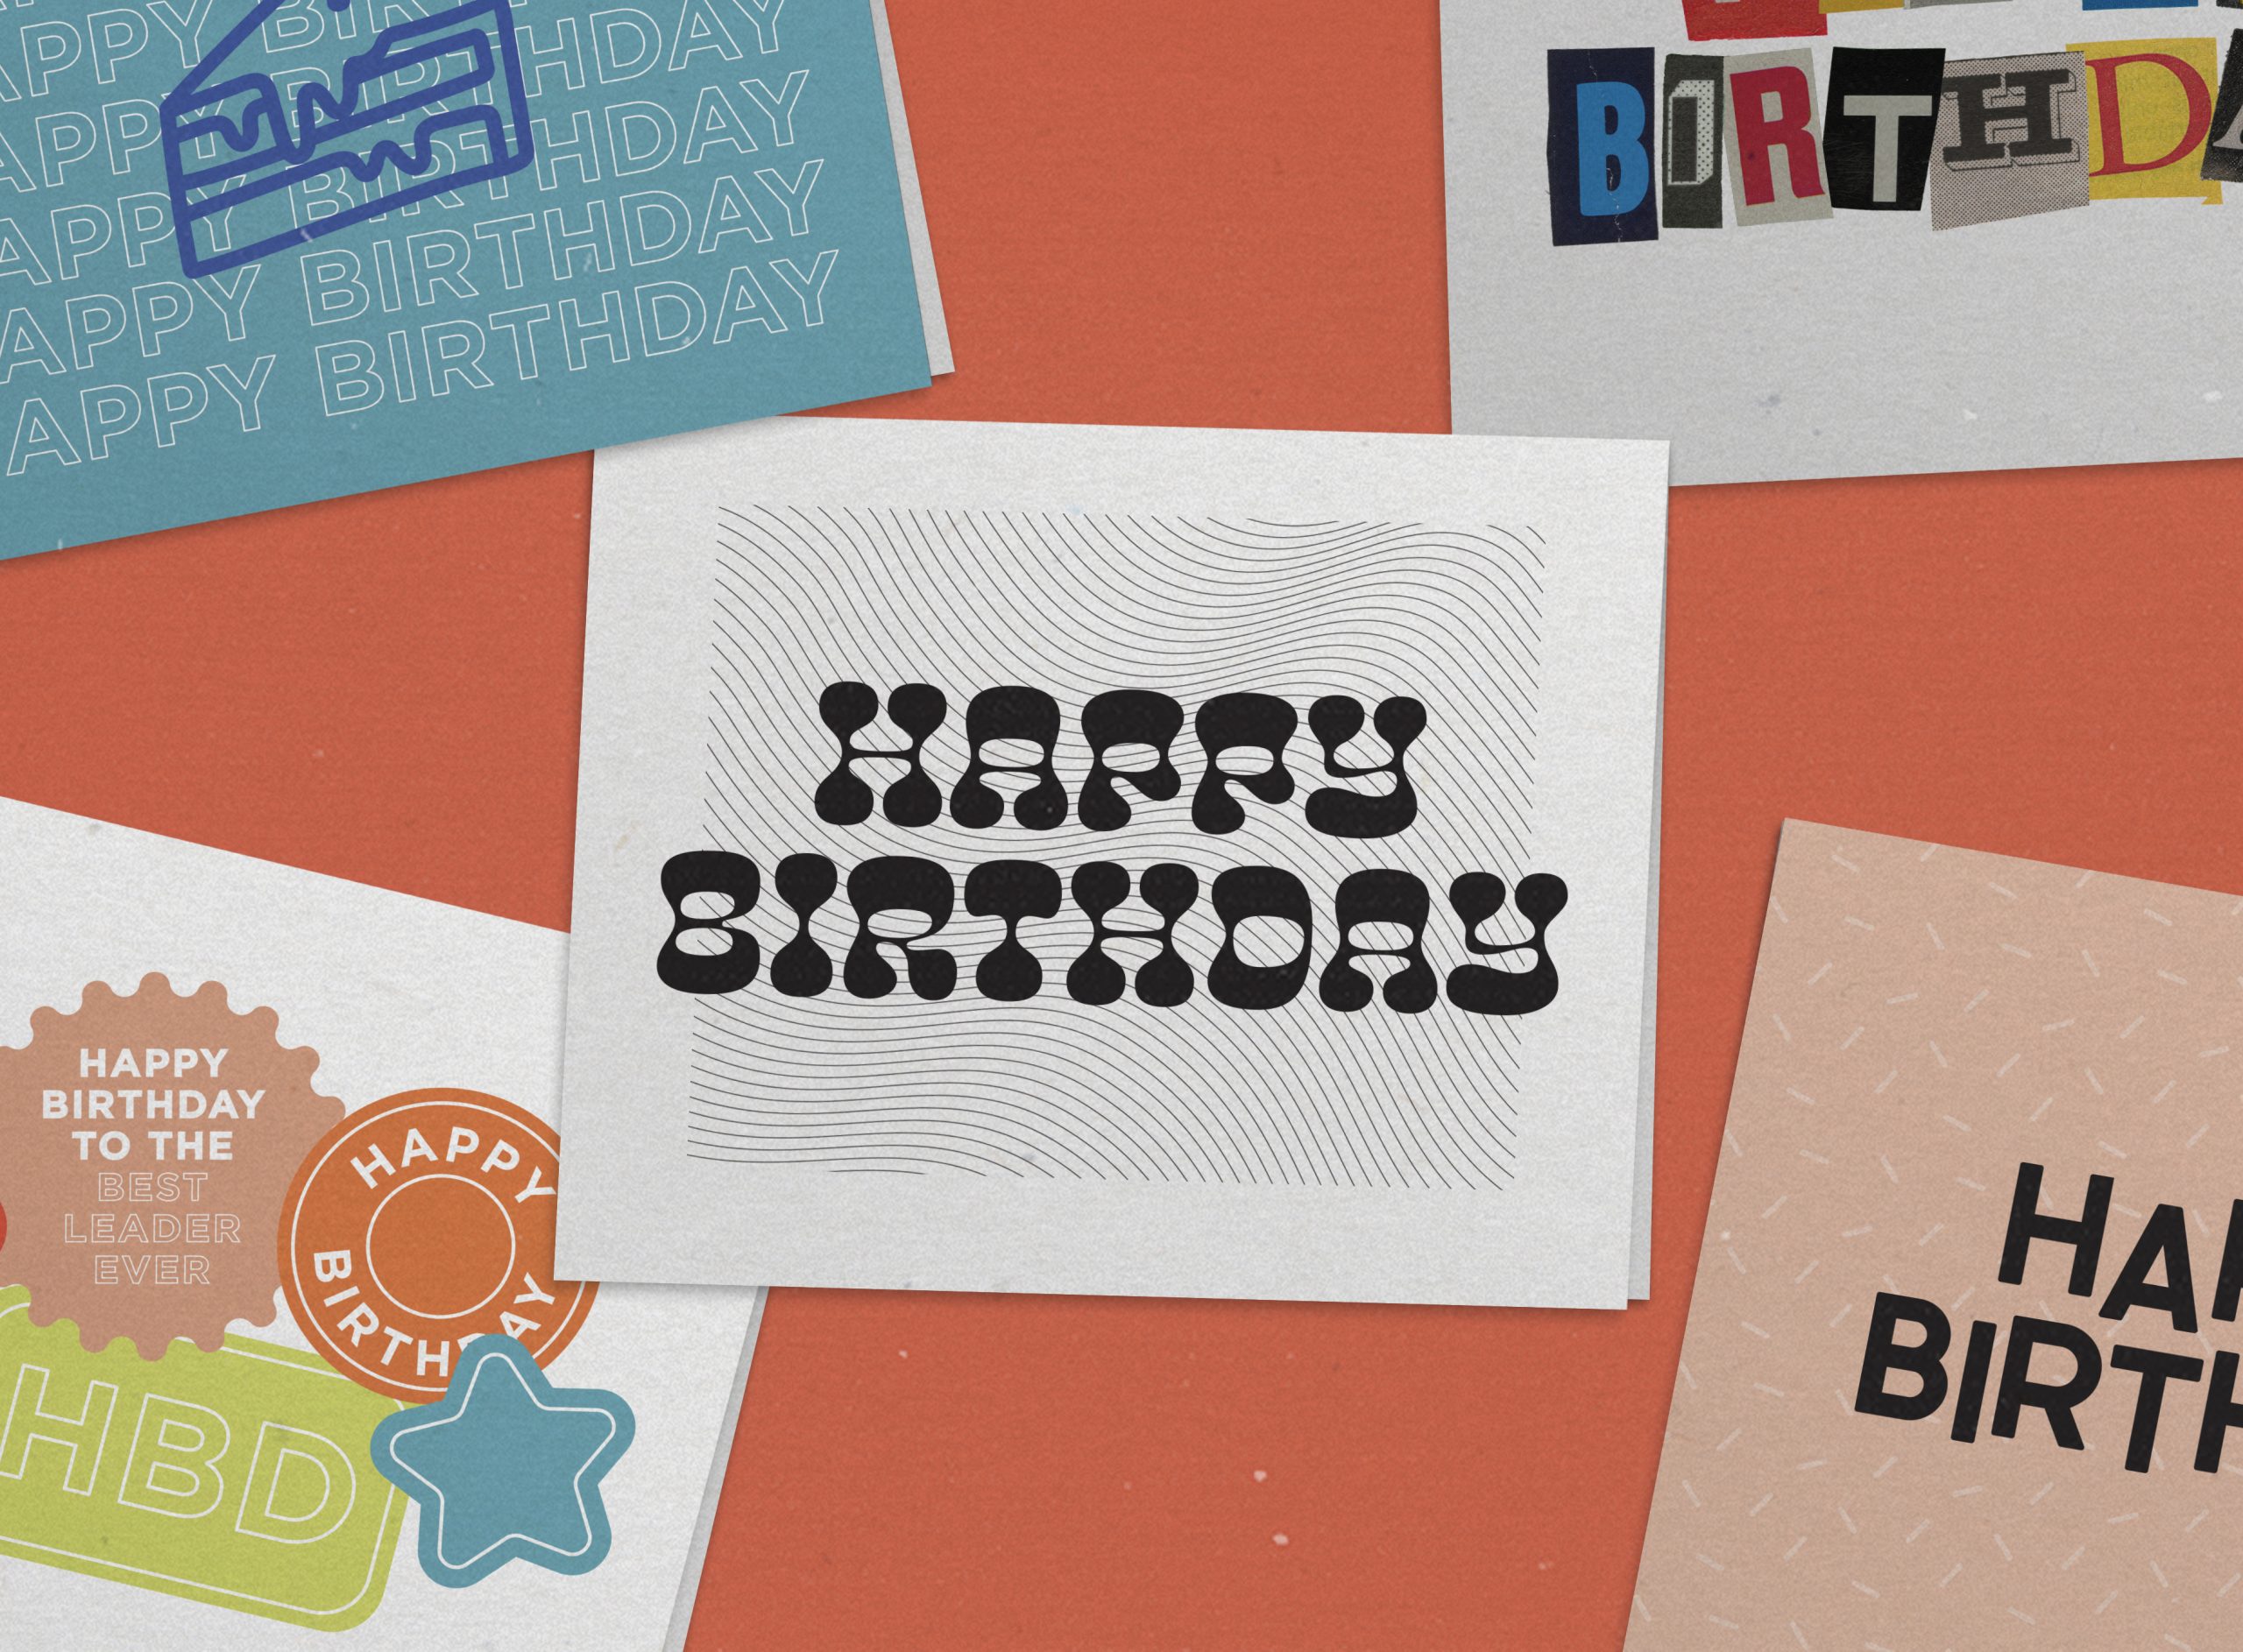 Small Group Leader Birthday Cards